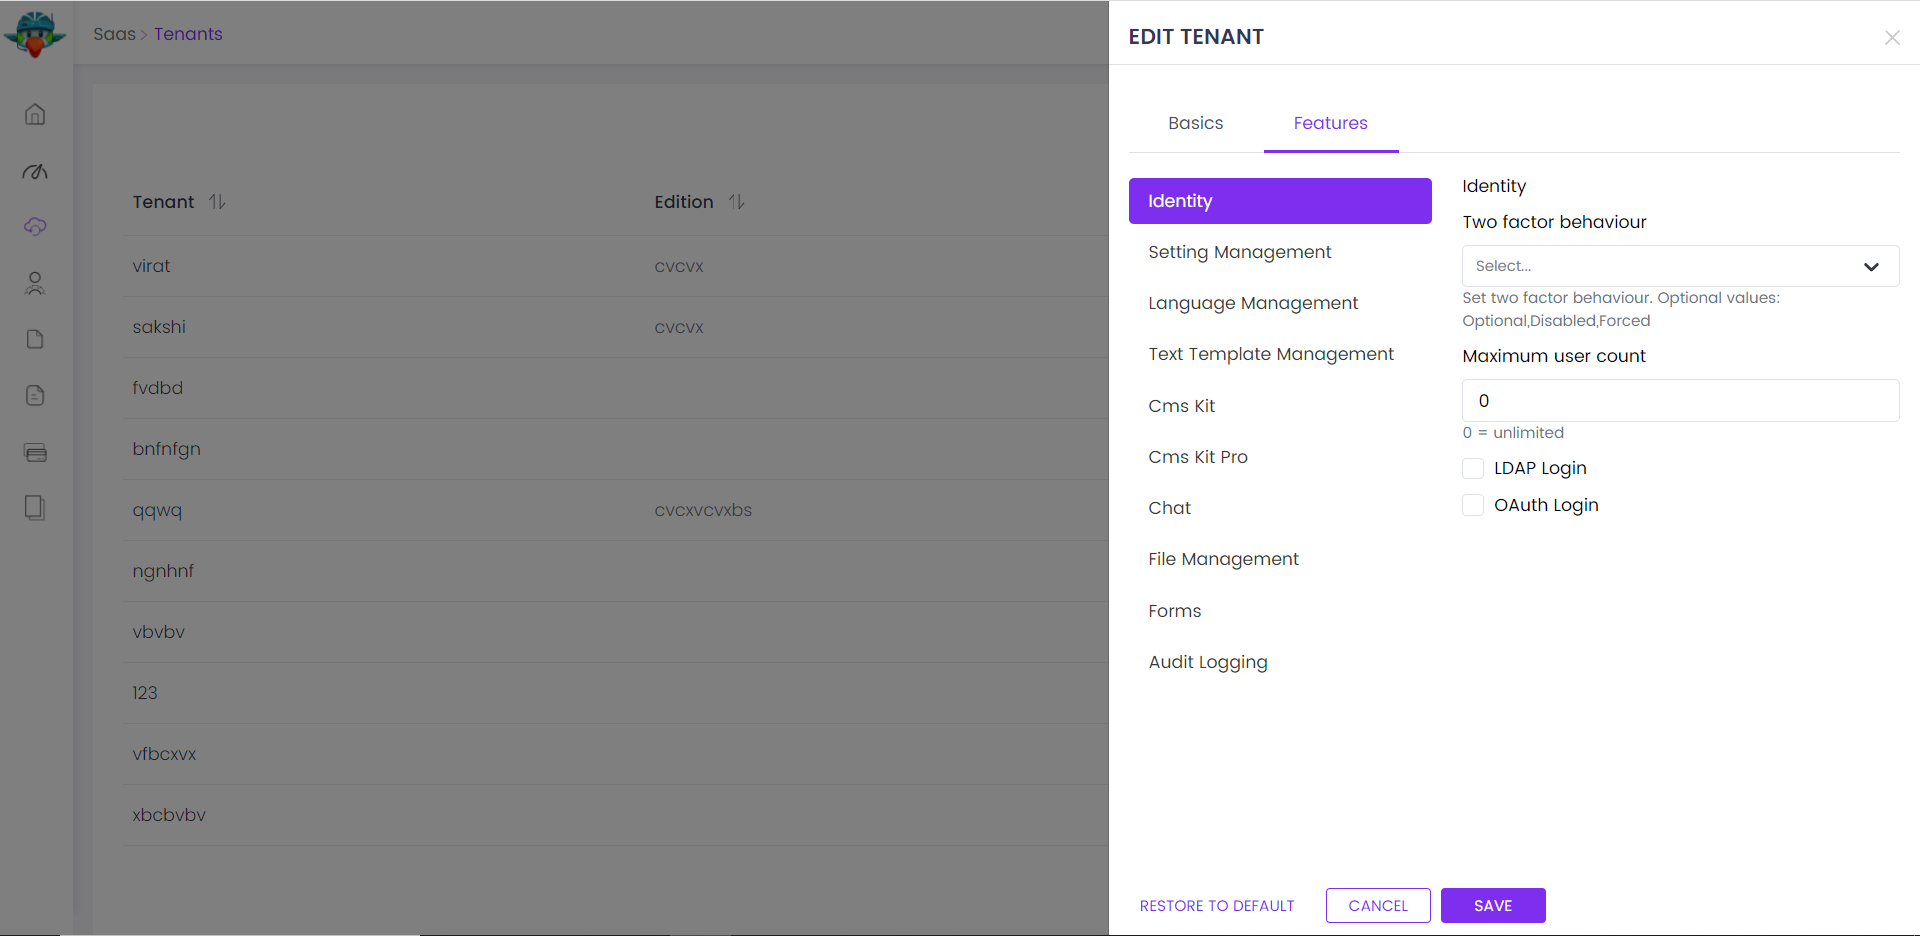 You can set features of tenants